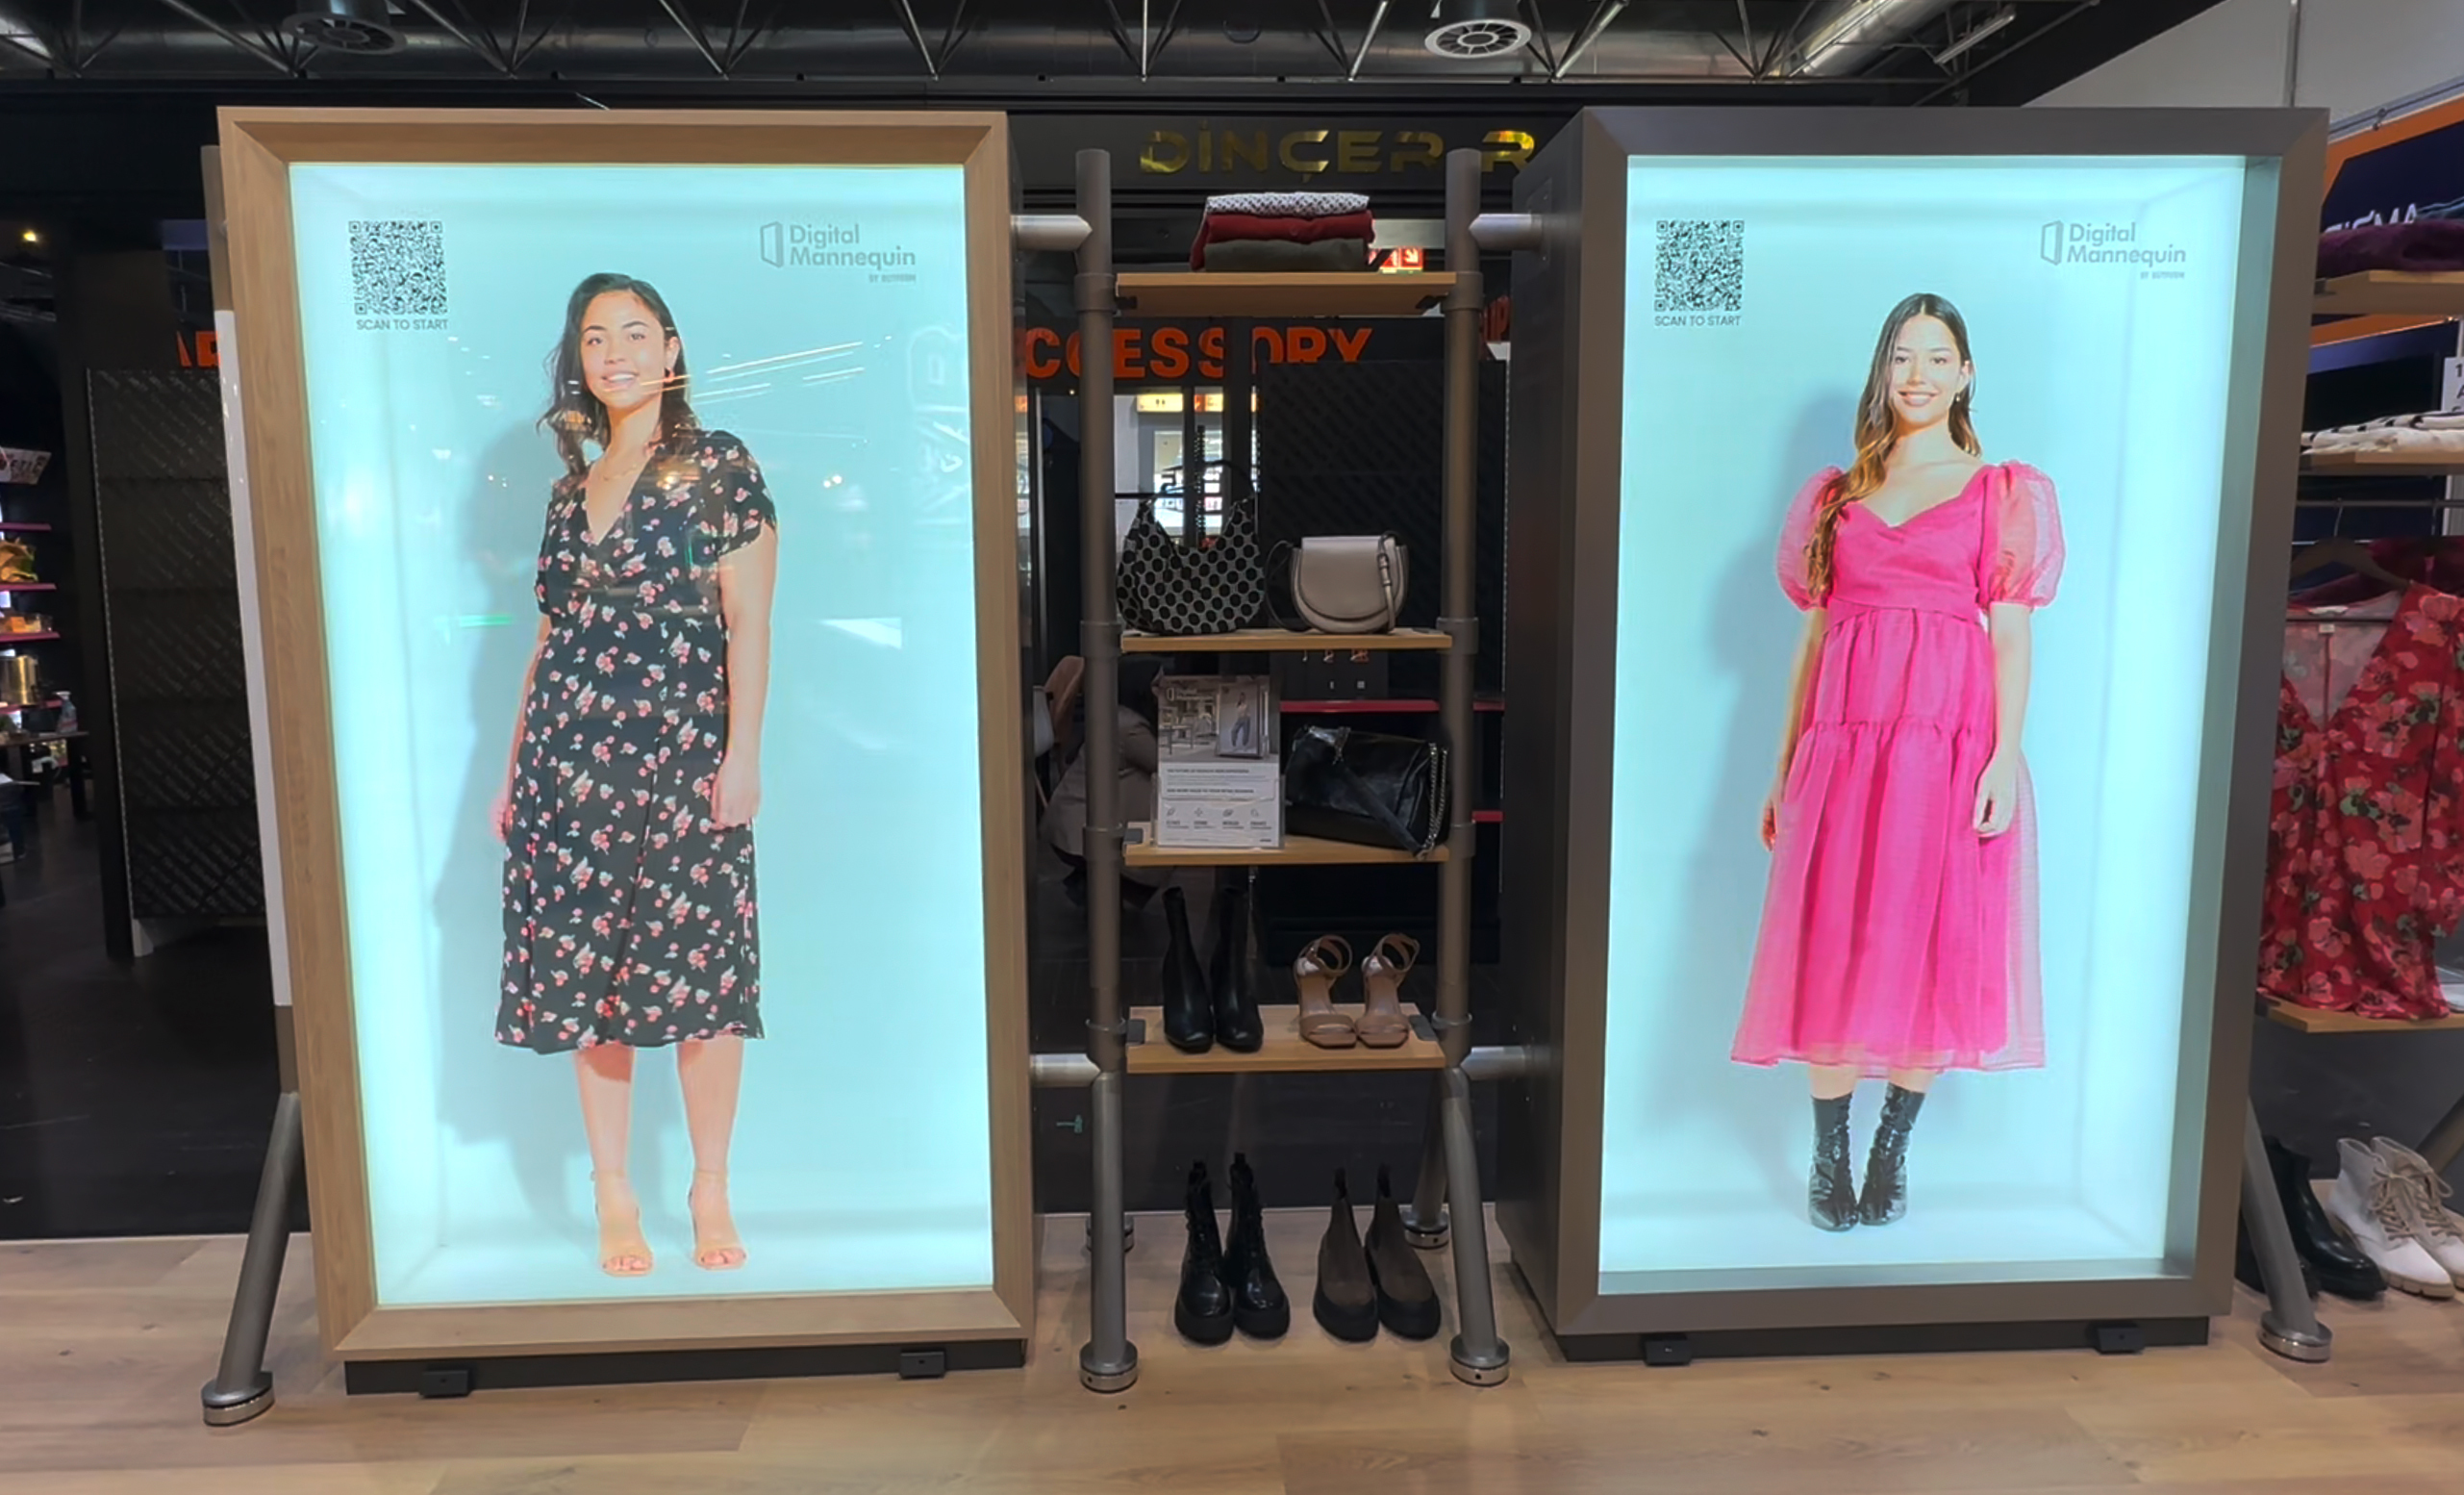 More retailers are requiring RFID tags, as TikTok calls out